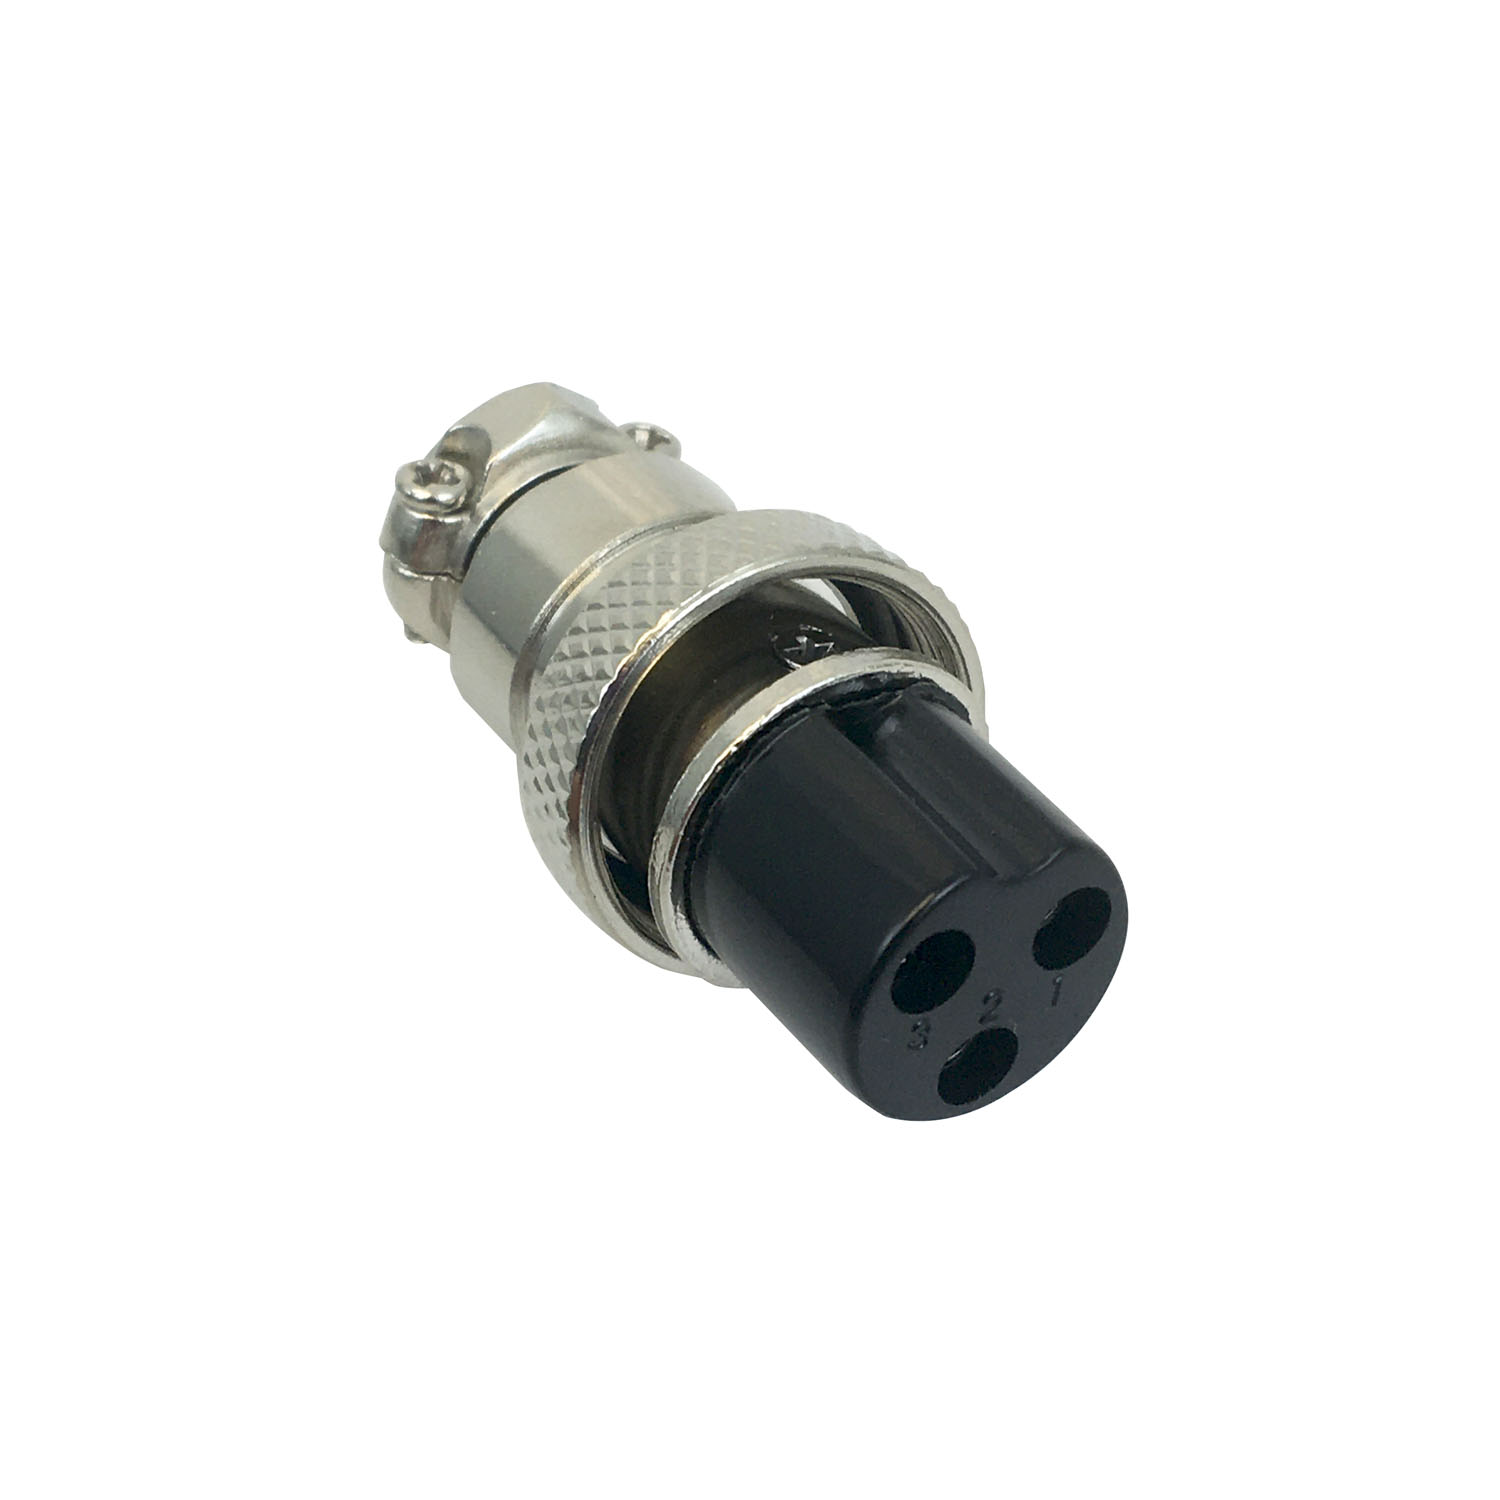 WORKMAN - C3 - 3 PIN FEMALE MICROPHONE CONNECTOR